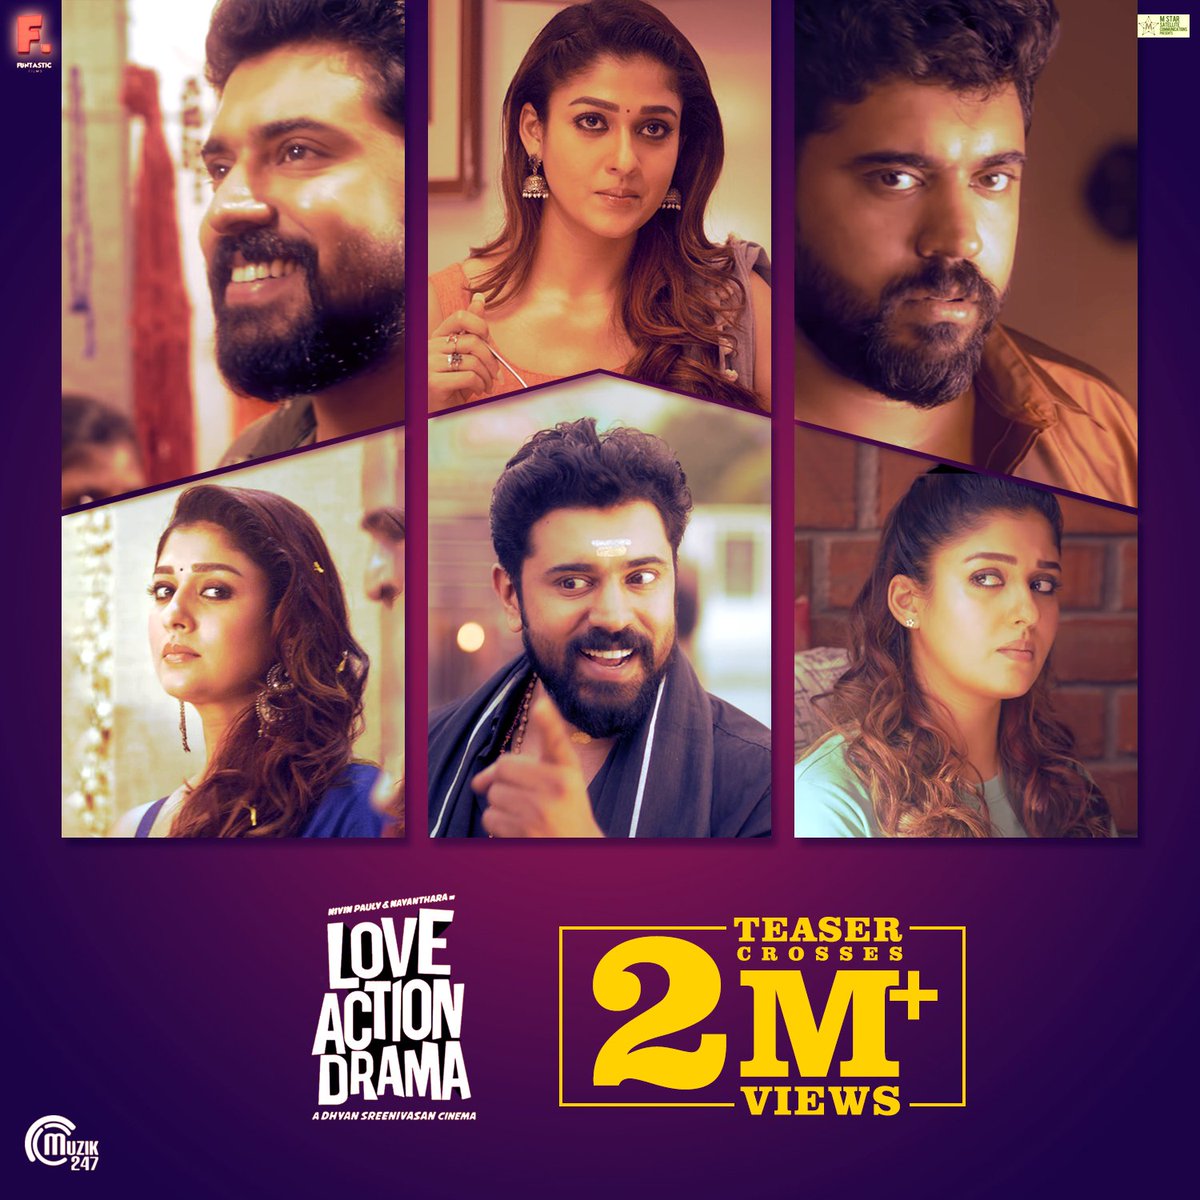 2 MILLION VIEWS for #LoveActionDrama Teaser! Have you watched the viral teaser yet? Check it out now >> youtube.com/watch?v=nmd2M-…

@NivinOfficial @NayantharaU @AjuVarghesee @Vineeth_Sree #DhyanSrinivasan @shaanrahman @Muzik247in